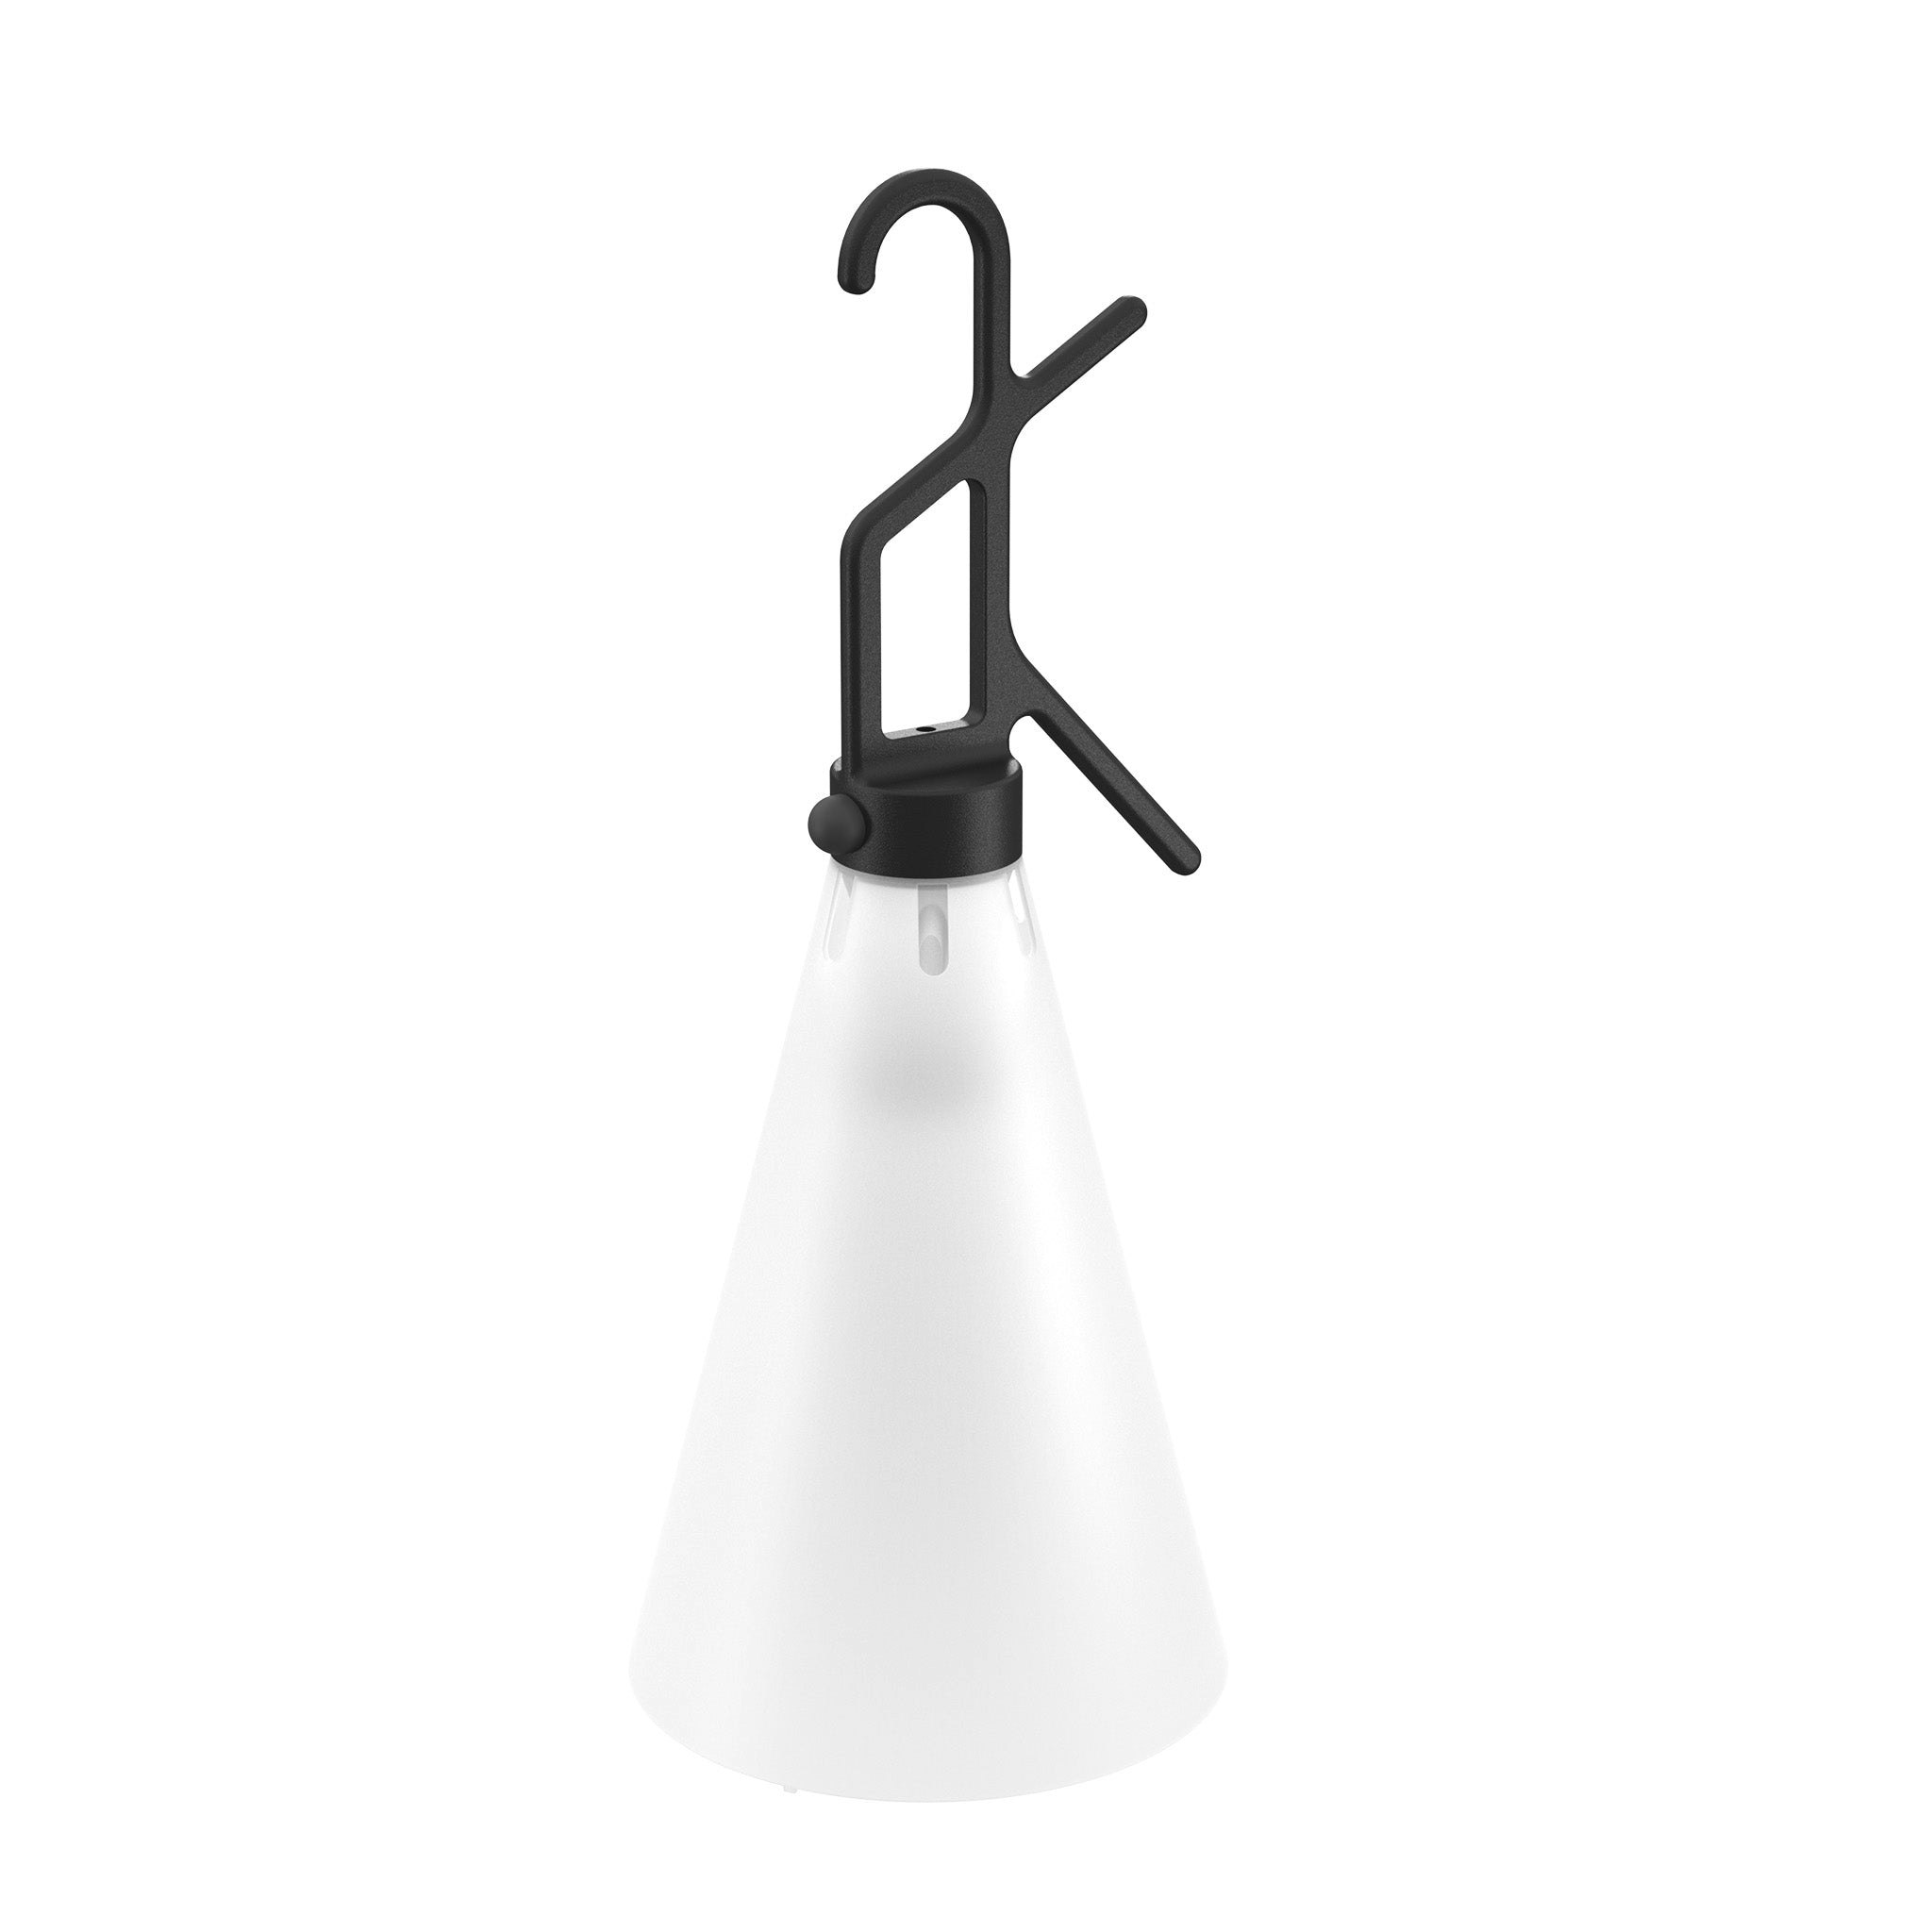 MayDay Outdoor Light by Konstantin Grcic for Flos